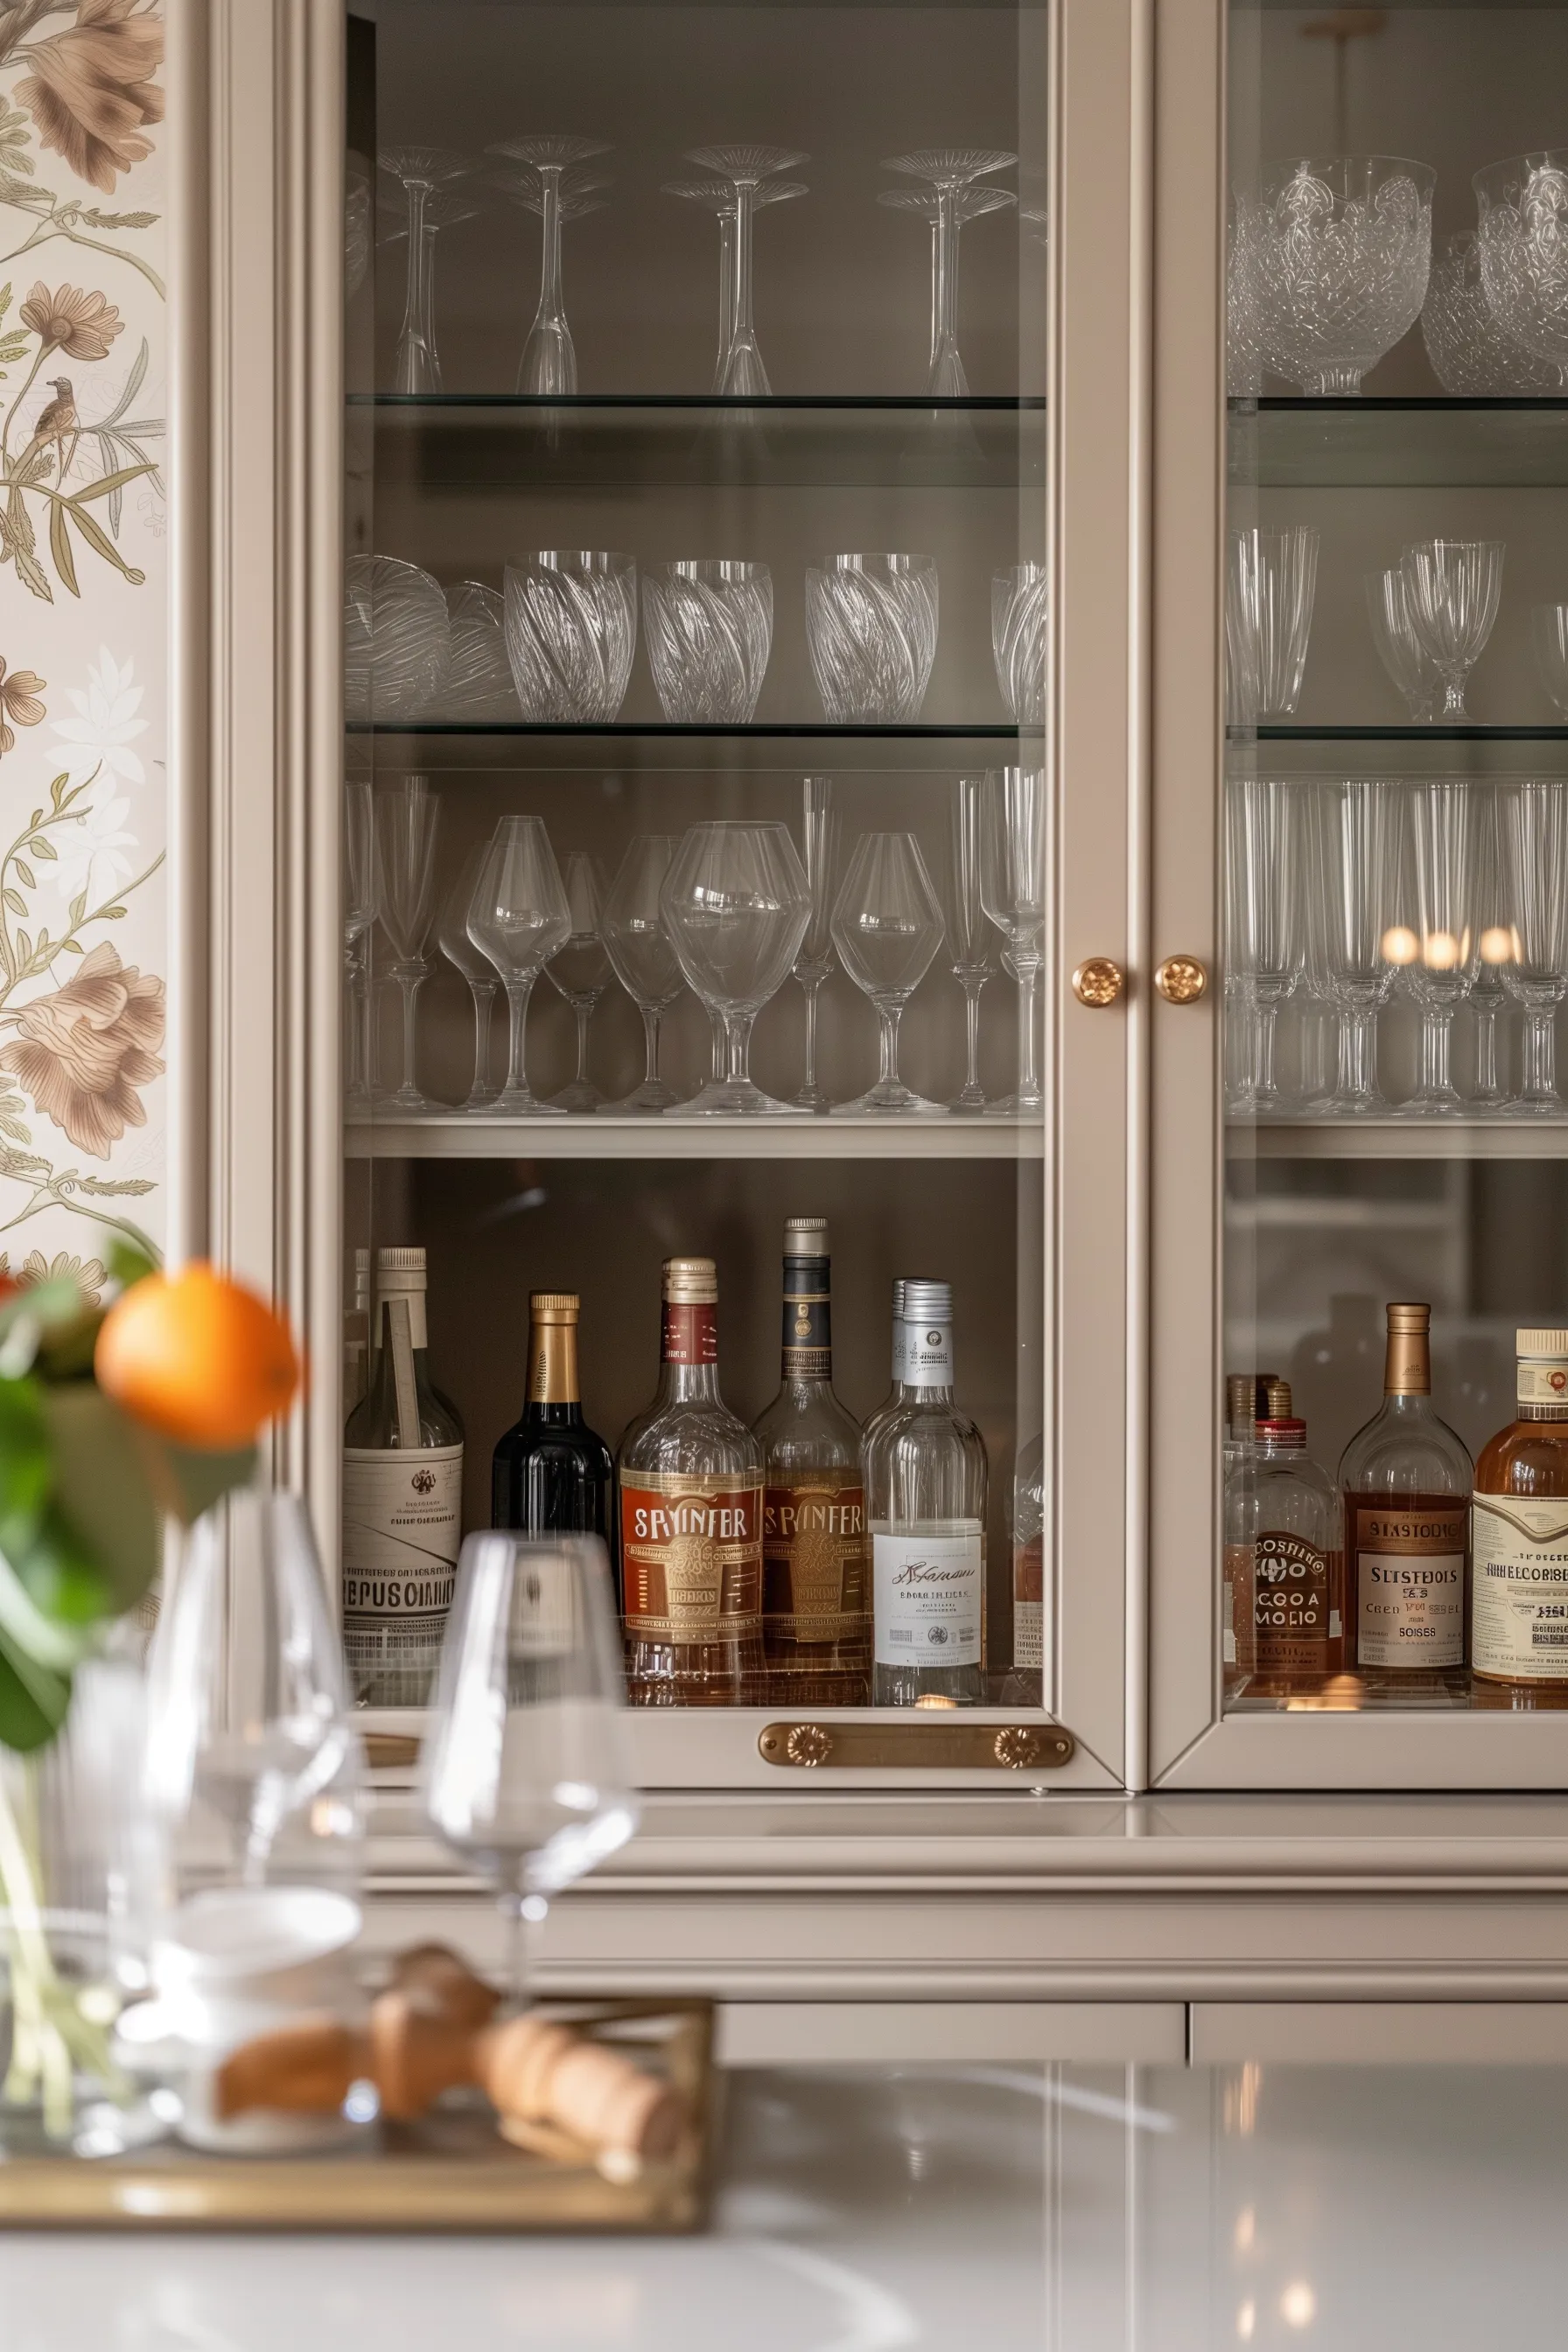 At home aesthetic bar shelves with glass doors